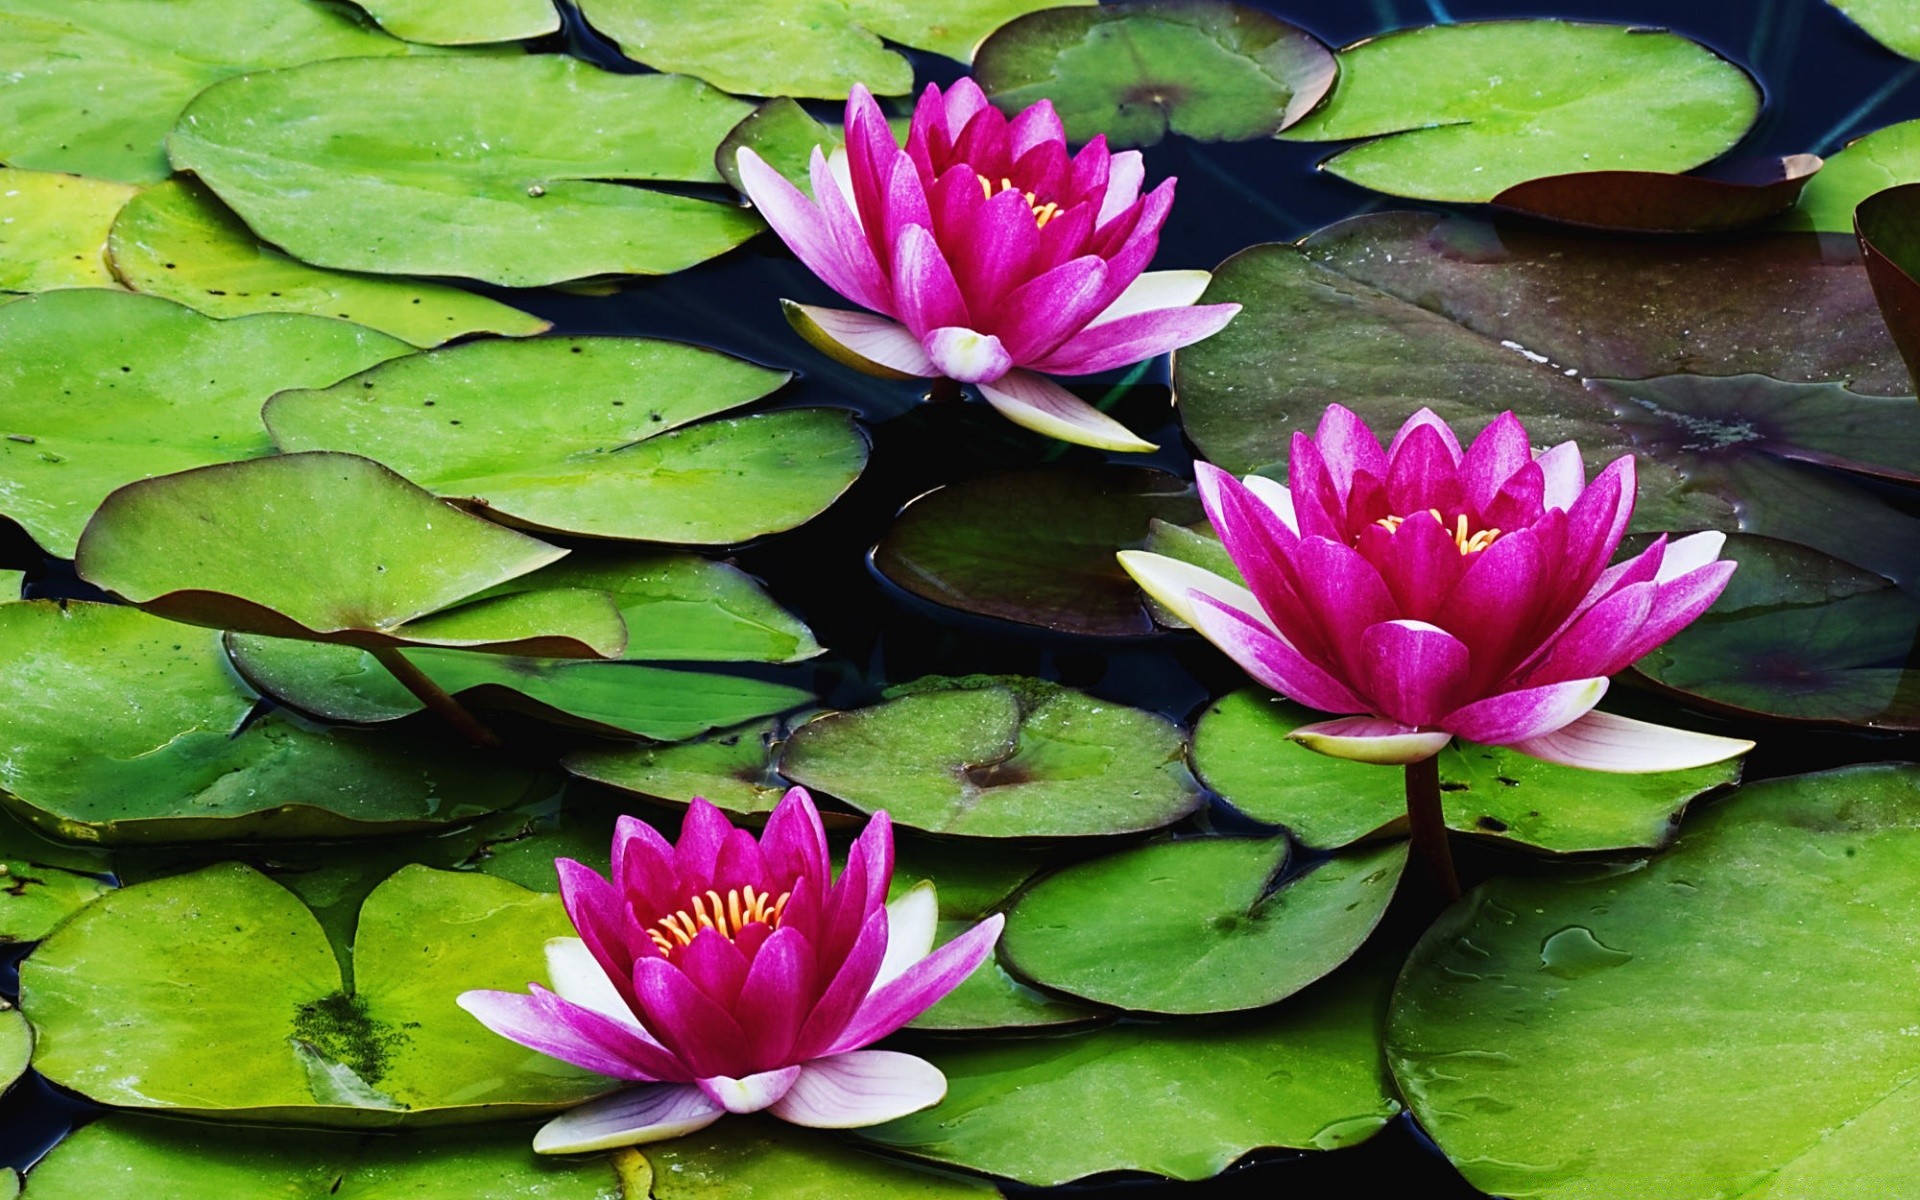 flowers lotus pool lily leaf flower tropical flora aquatic waterlily exotic nature blooming swimming garden floral petal summer nelumbo meditation